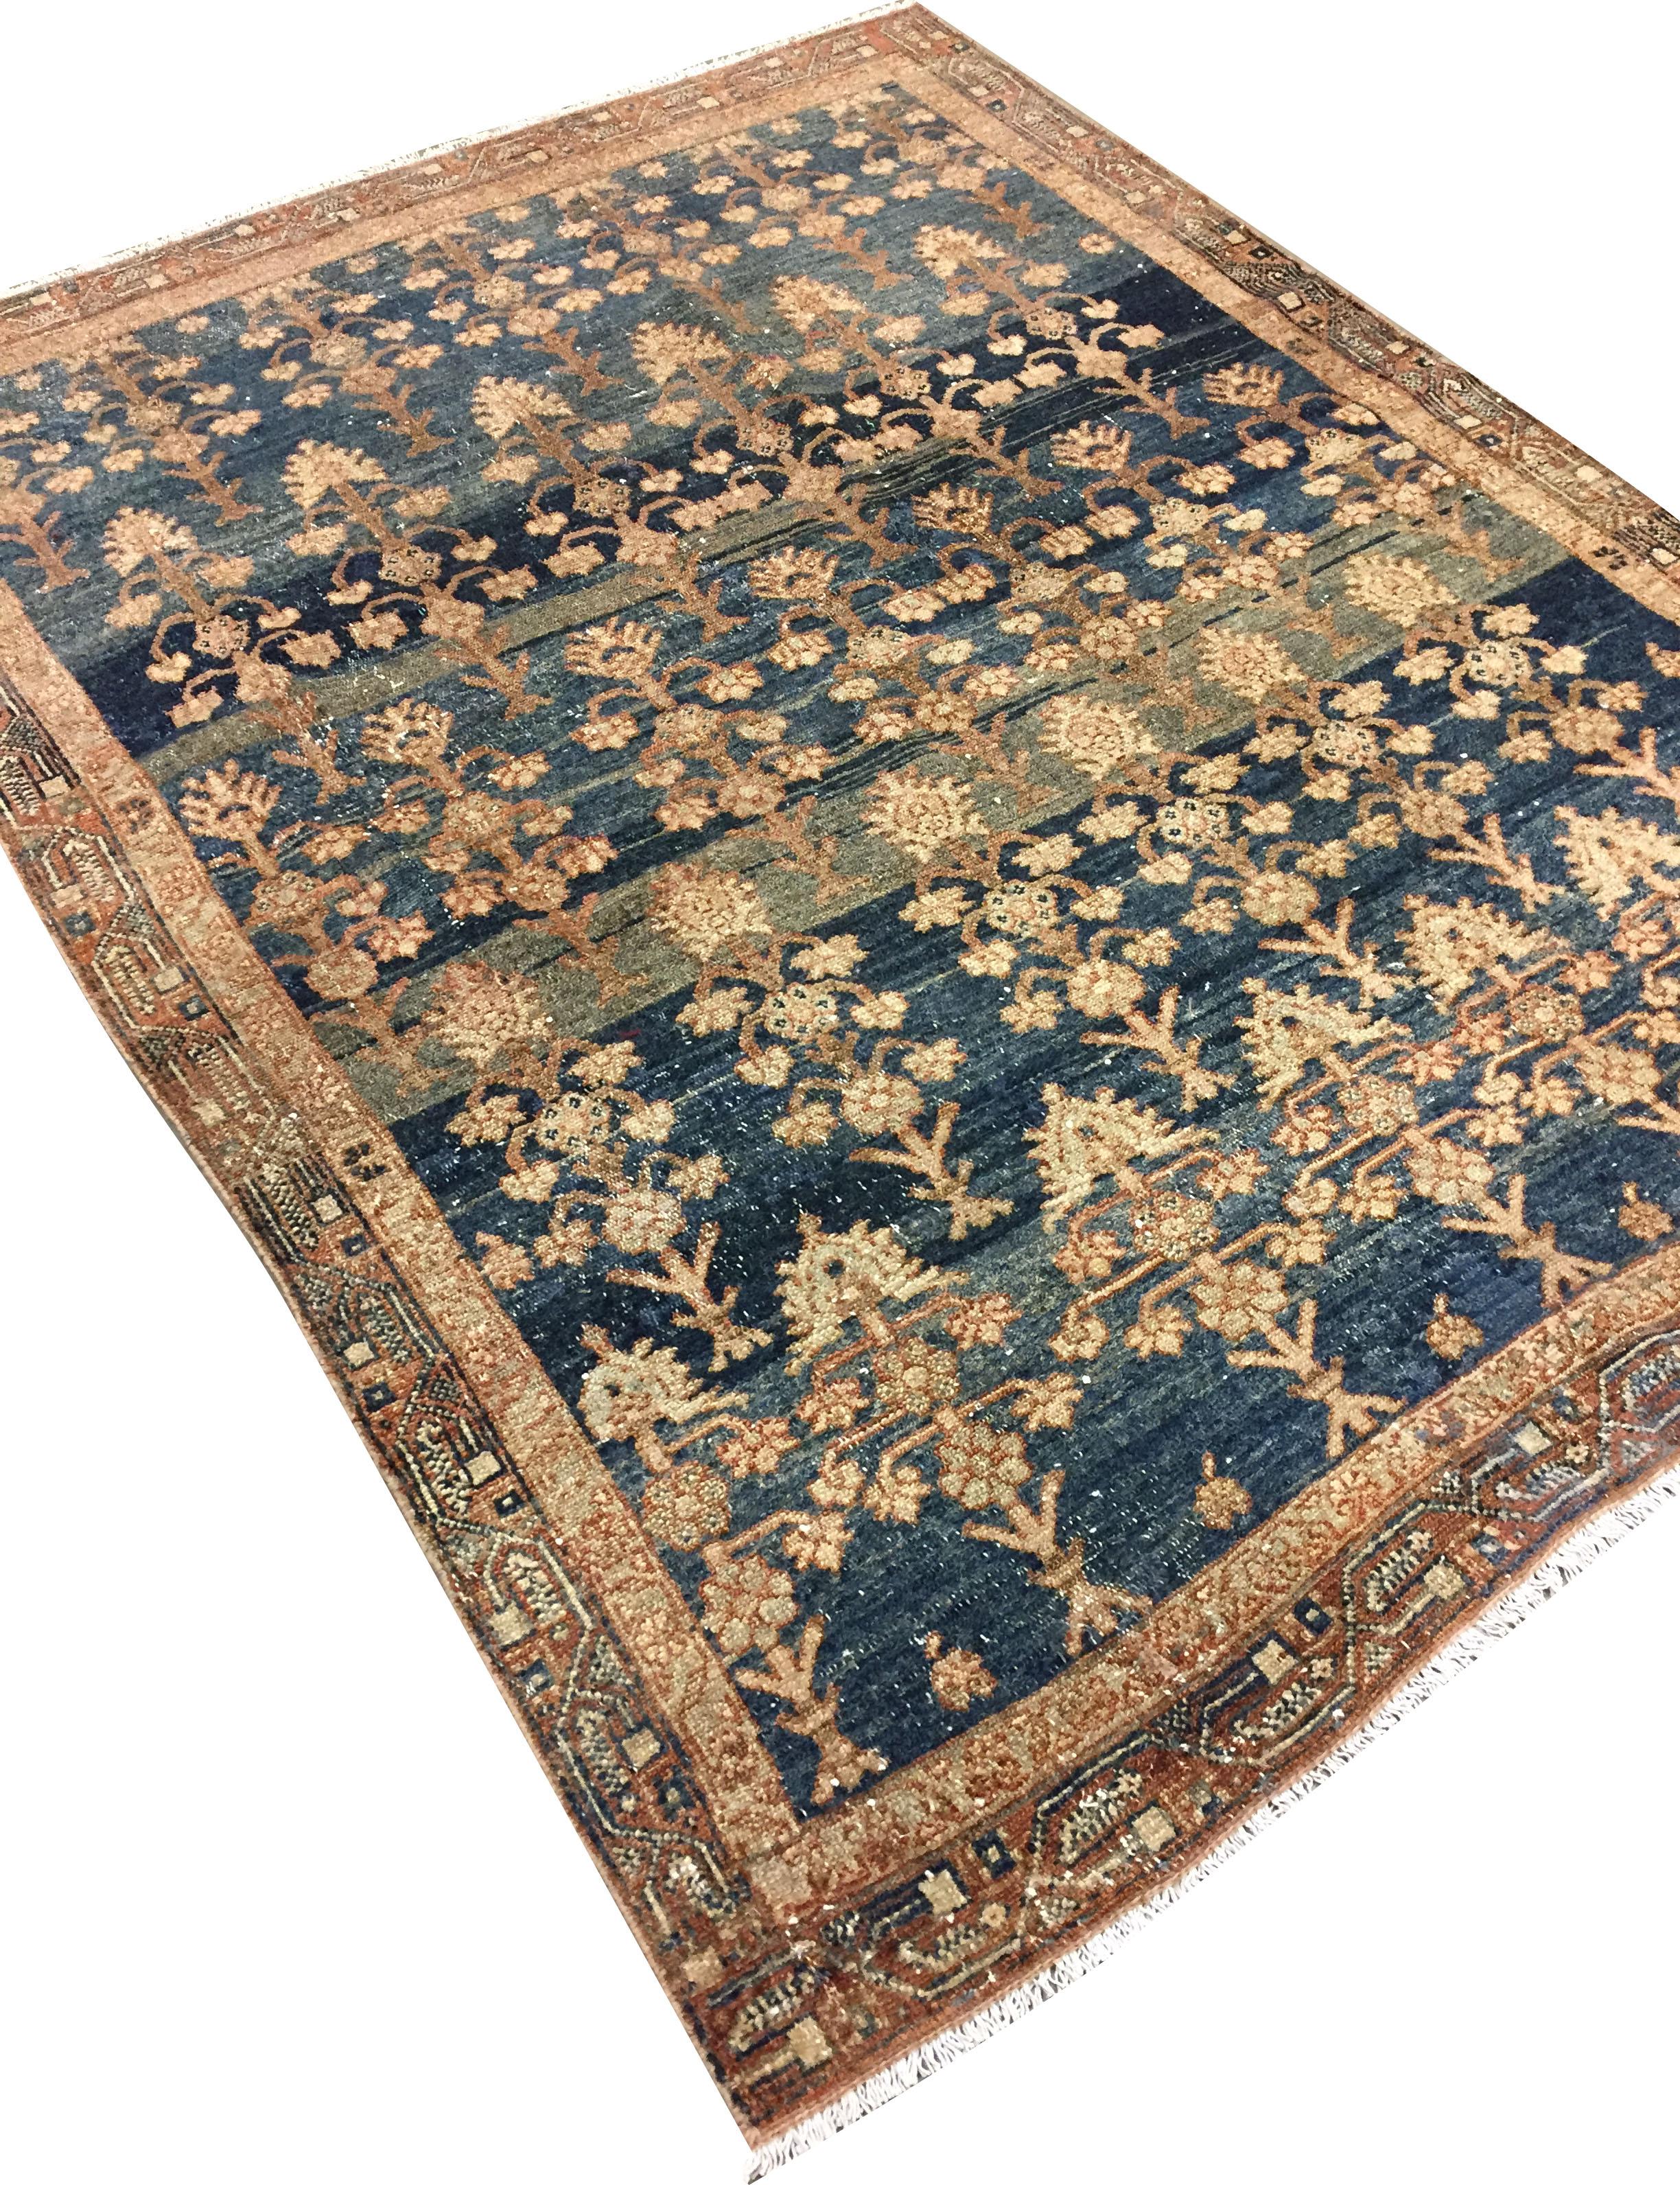 Hand-Woven Antique Slightly Distressed Persian Malayer Rug  4' x 5'5 For Sale